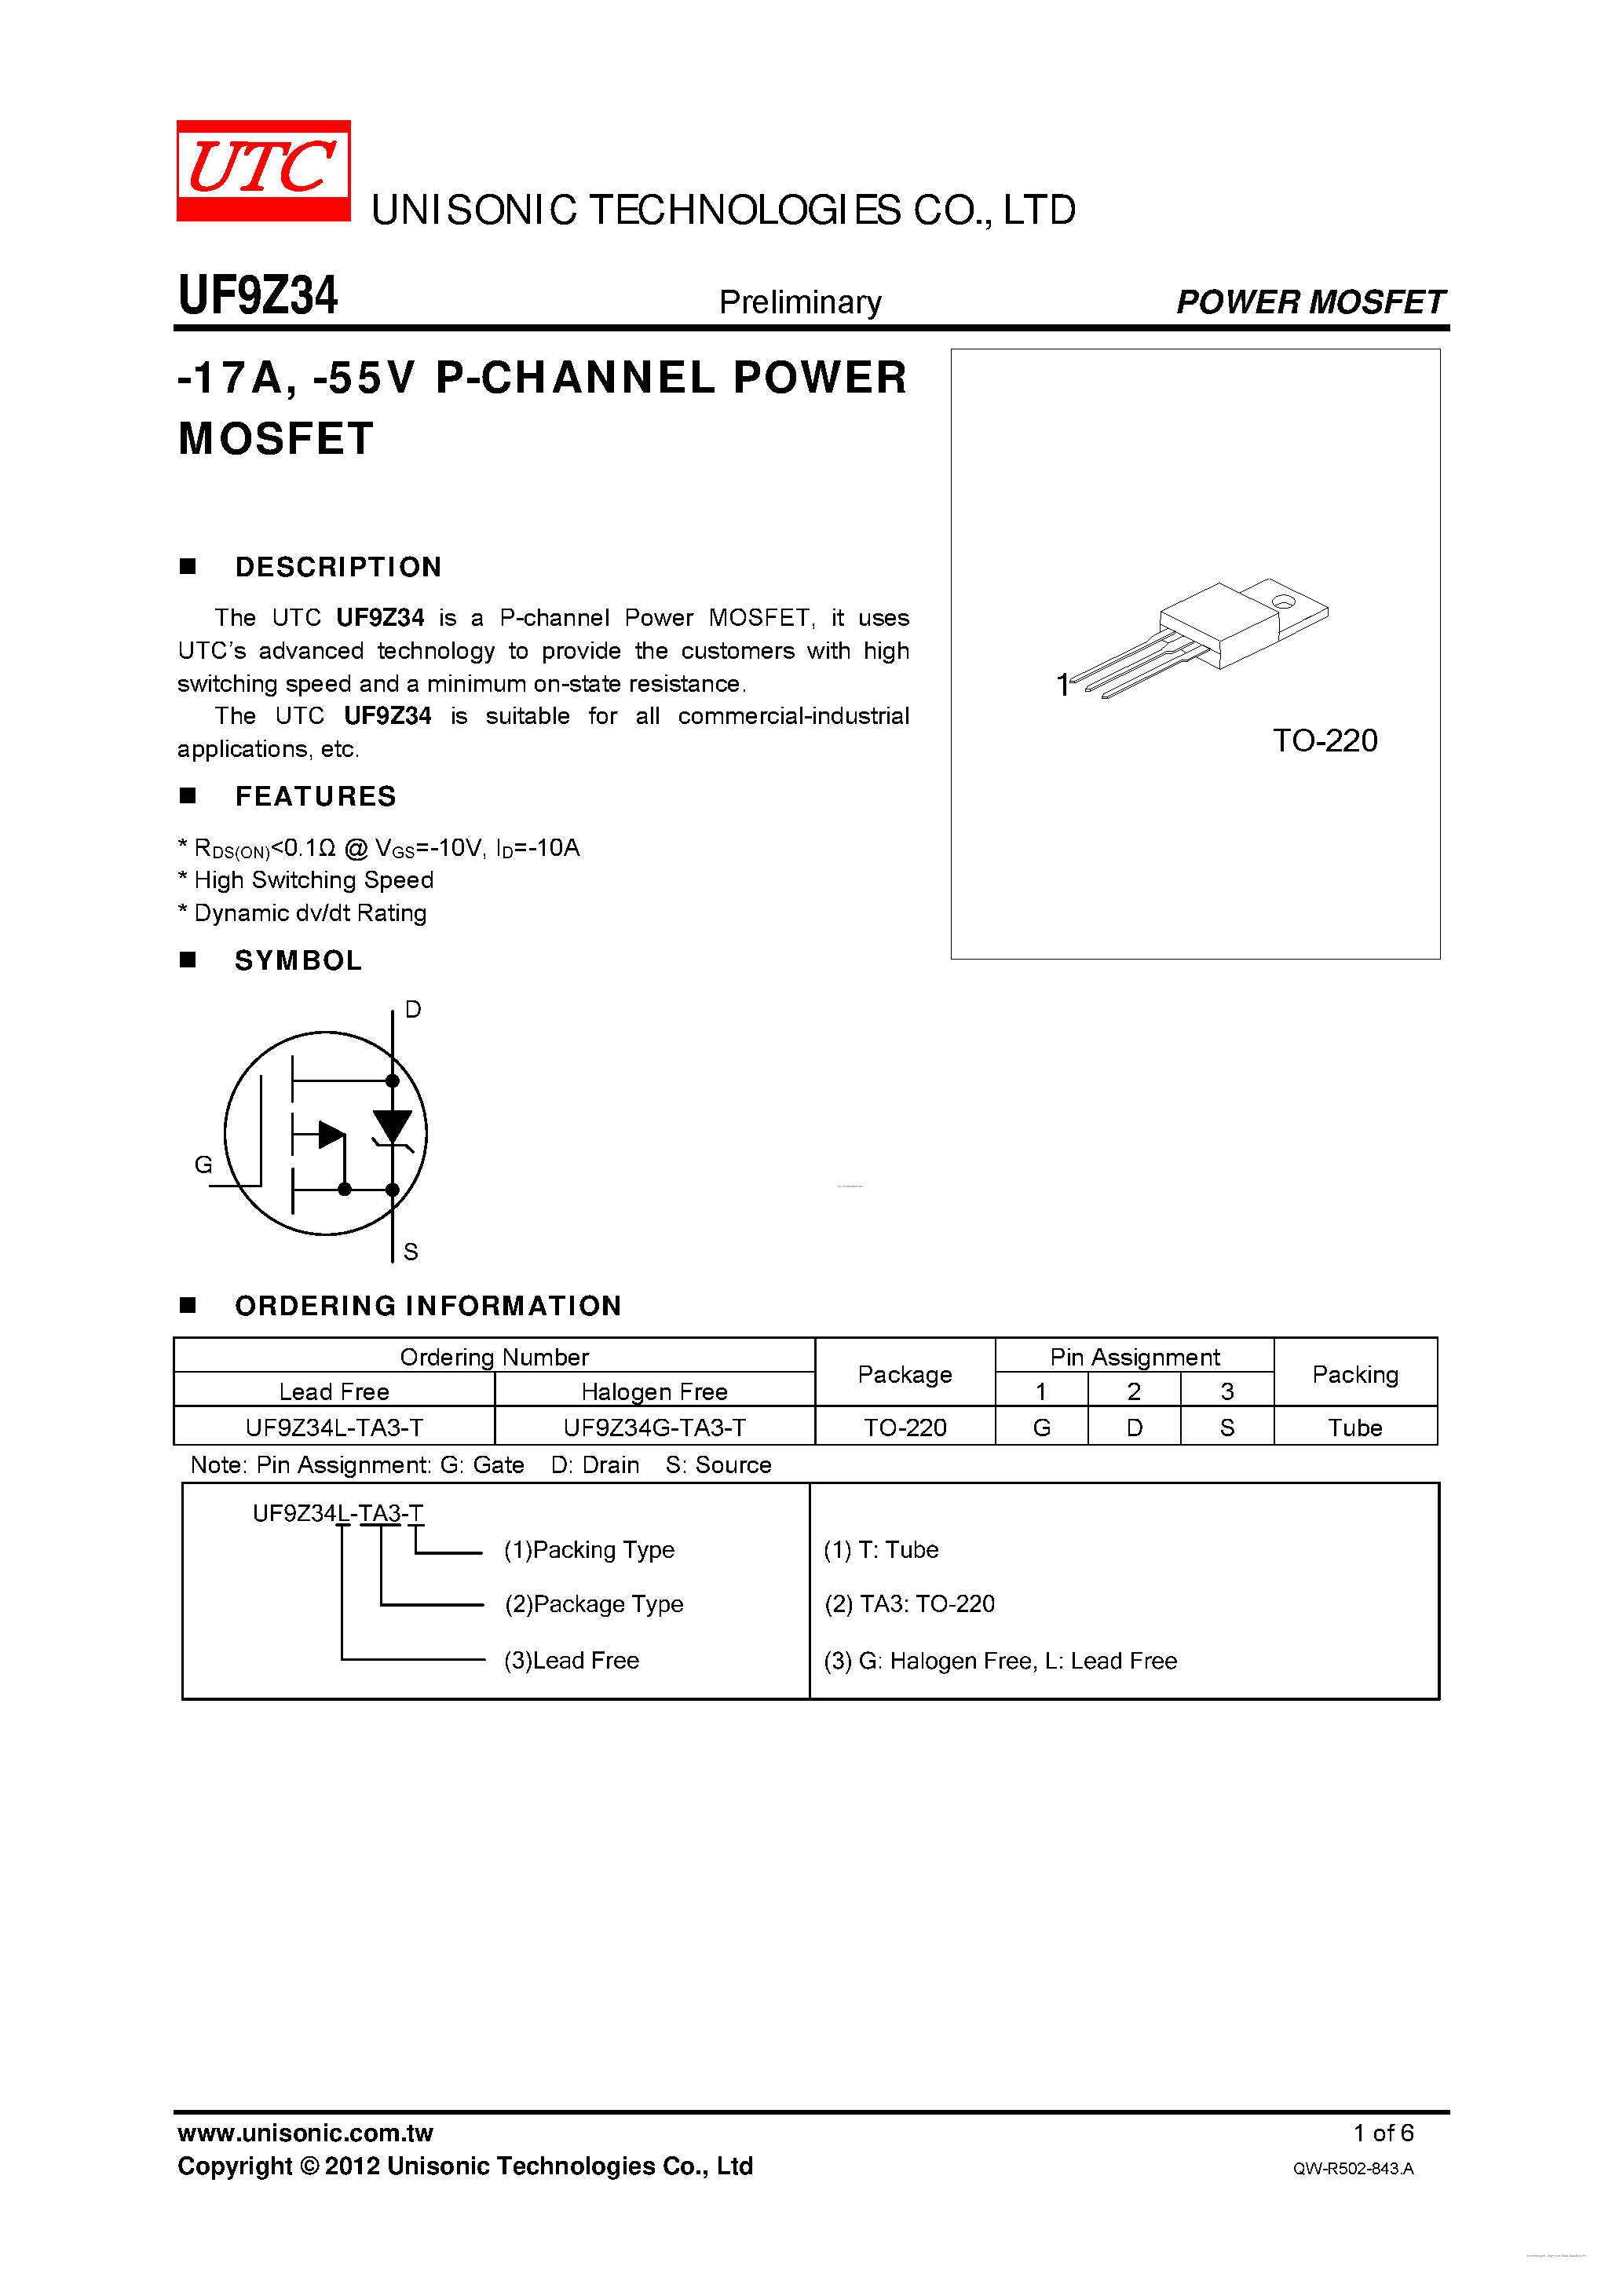 Datasheet UF9Z34 - P-CHANNEL POWER MOSFET page 1